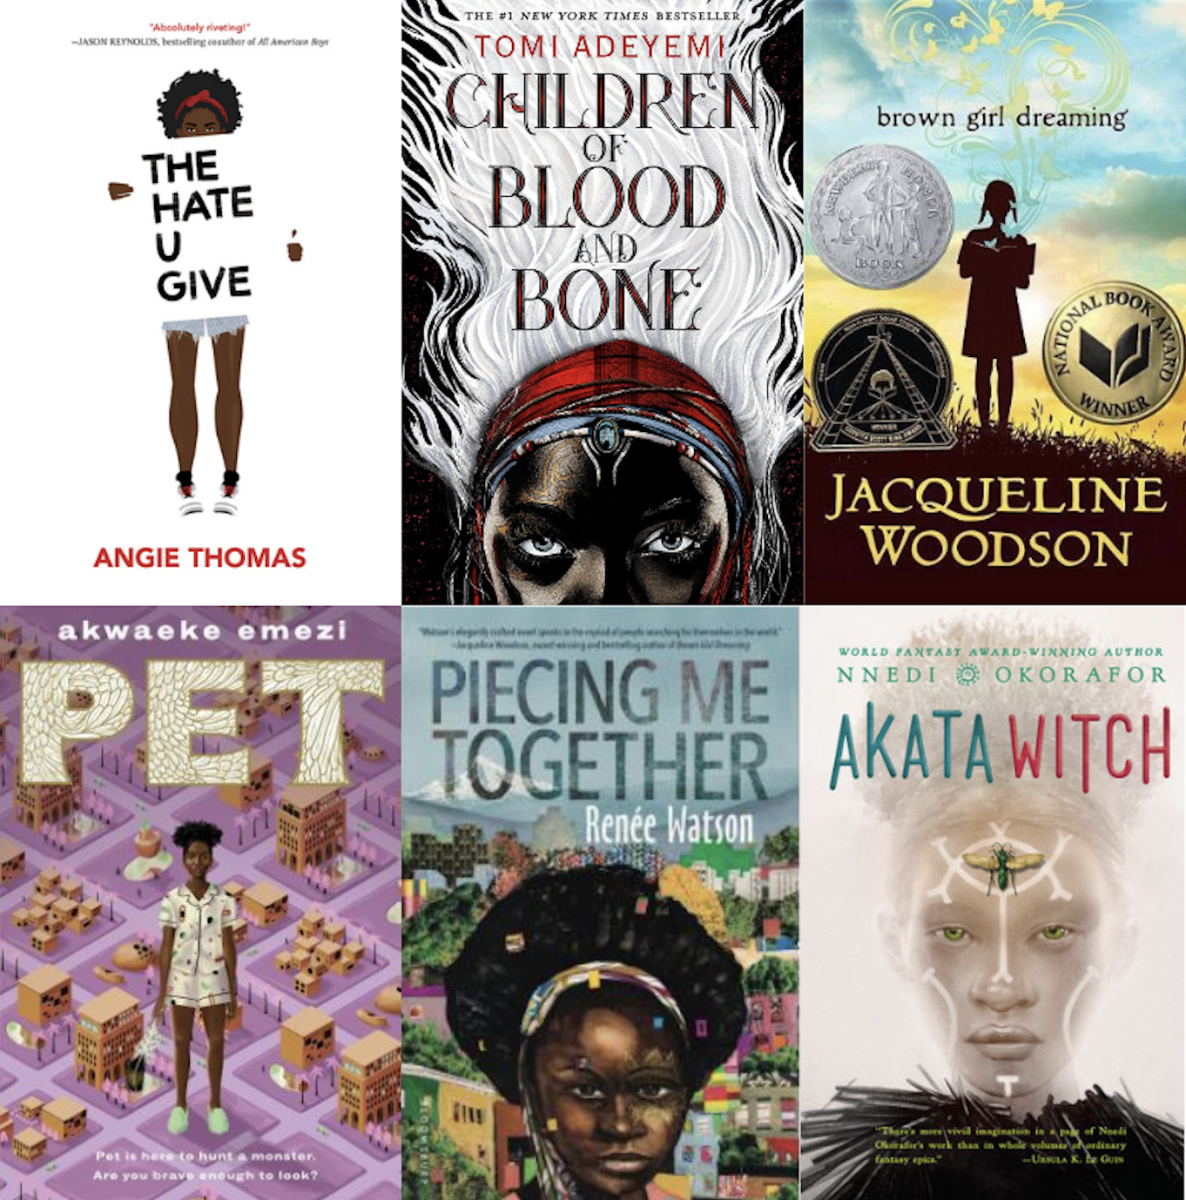 Top+left+to+bottom+right%3A+The+Hate+U+Give+by+Angie+Thomas%2C+Children+of+Blood+and+Bone+by+Tomi+Adeyemi%2C+Brown+Girl+Dreaming+by+Jacqueline+Woodson%2C+Pet+by+Akwaeke+Emezi%2C+Piecing+Me+Together+by+Ren%C3%A9e+Watson+and+Akata+Witch+by+Nnedi+Okorafor.+%28Courtesy+of+Goodreads%29